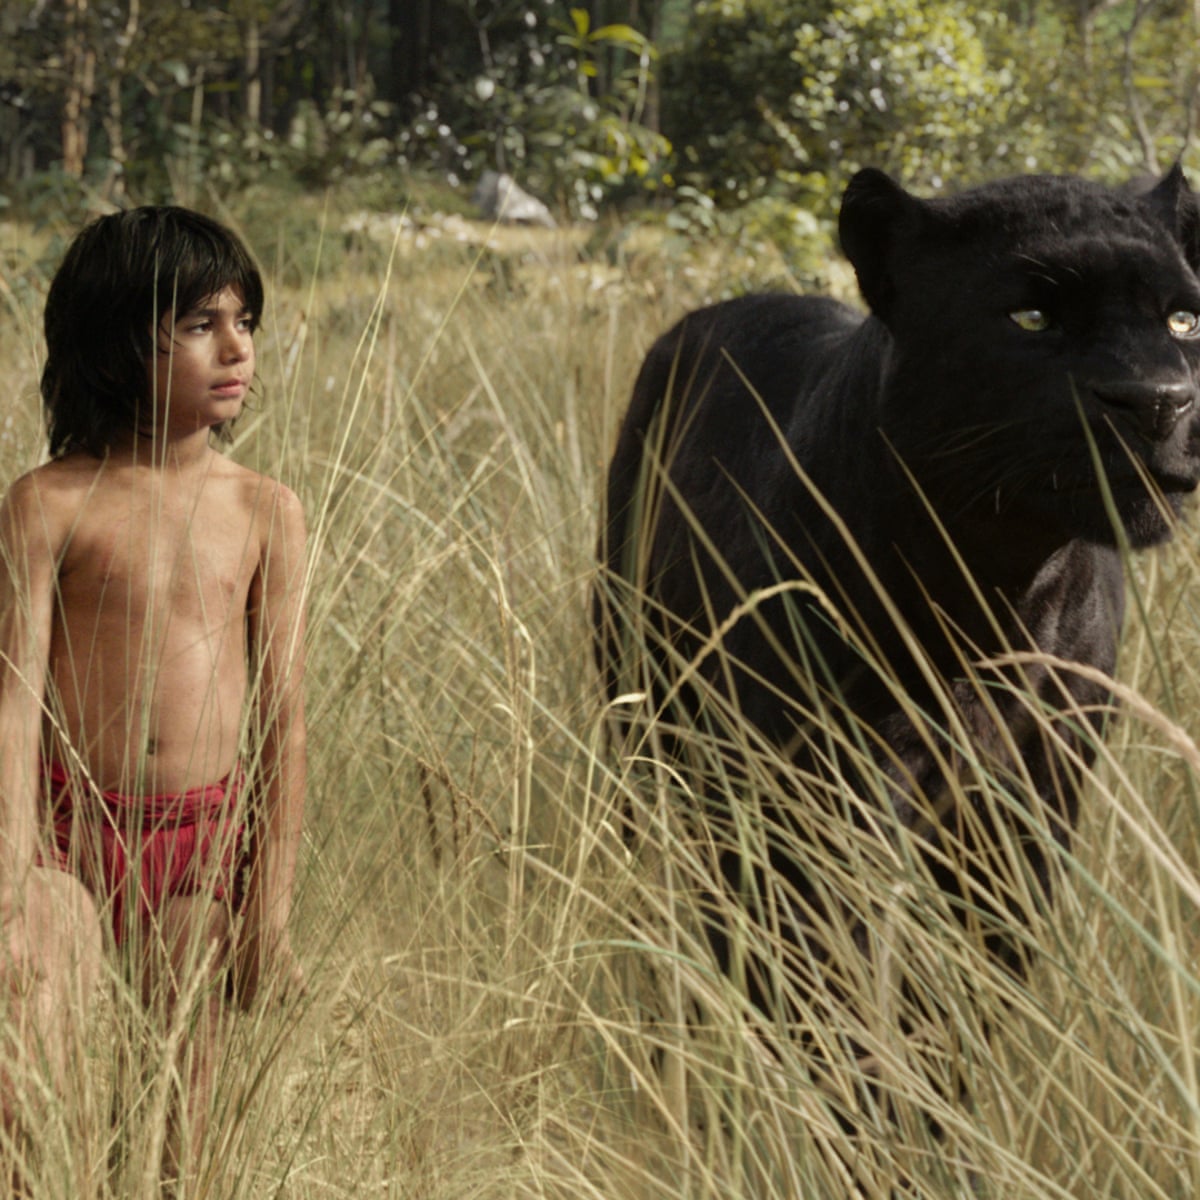 Racism warning on remake of Jungle Book film | Movies | The Guardian